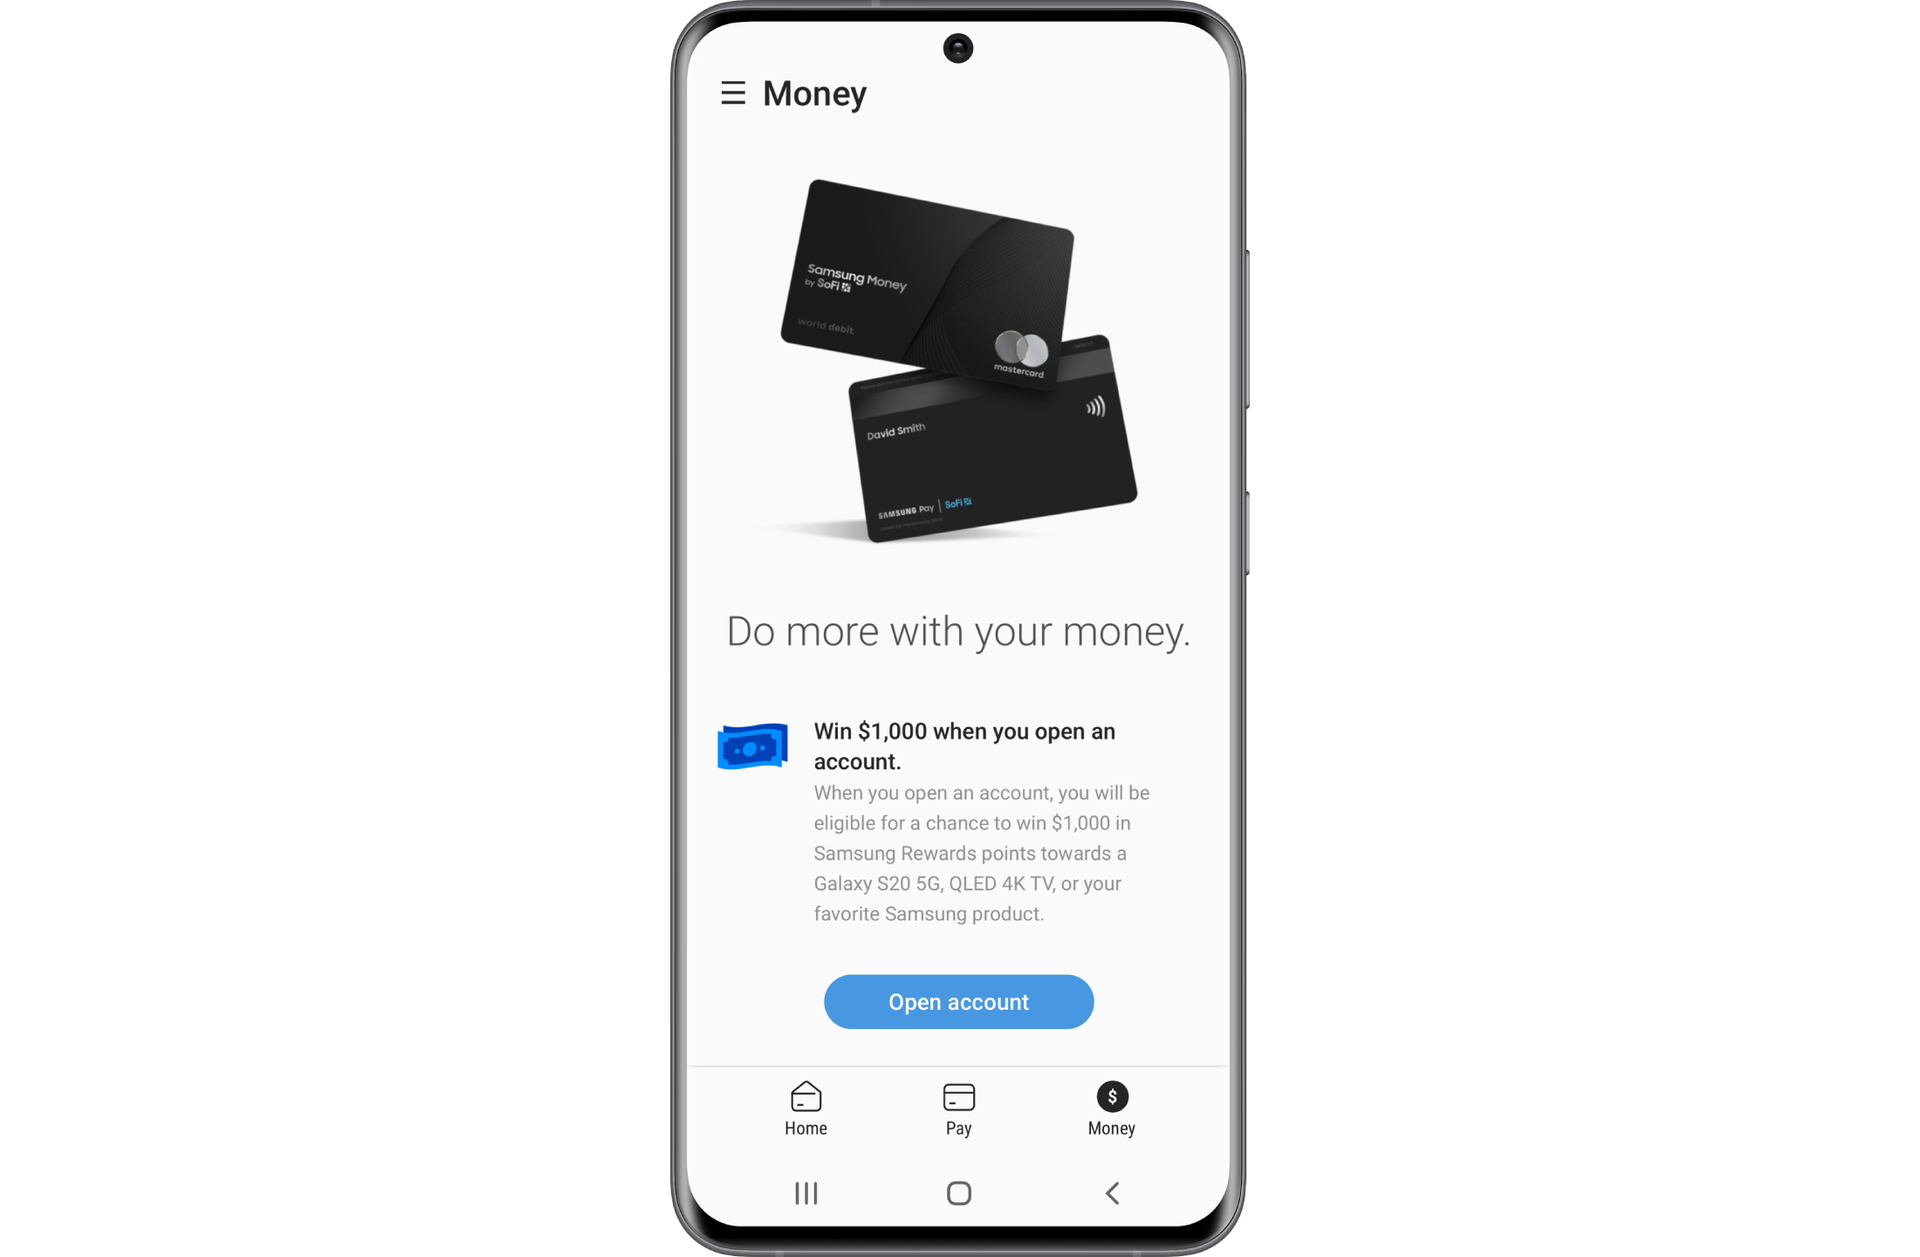 Samsung Debit Card Payment Tab On Samsung Pay